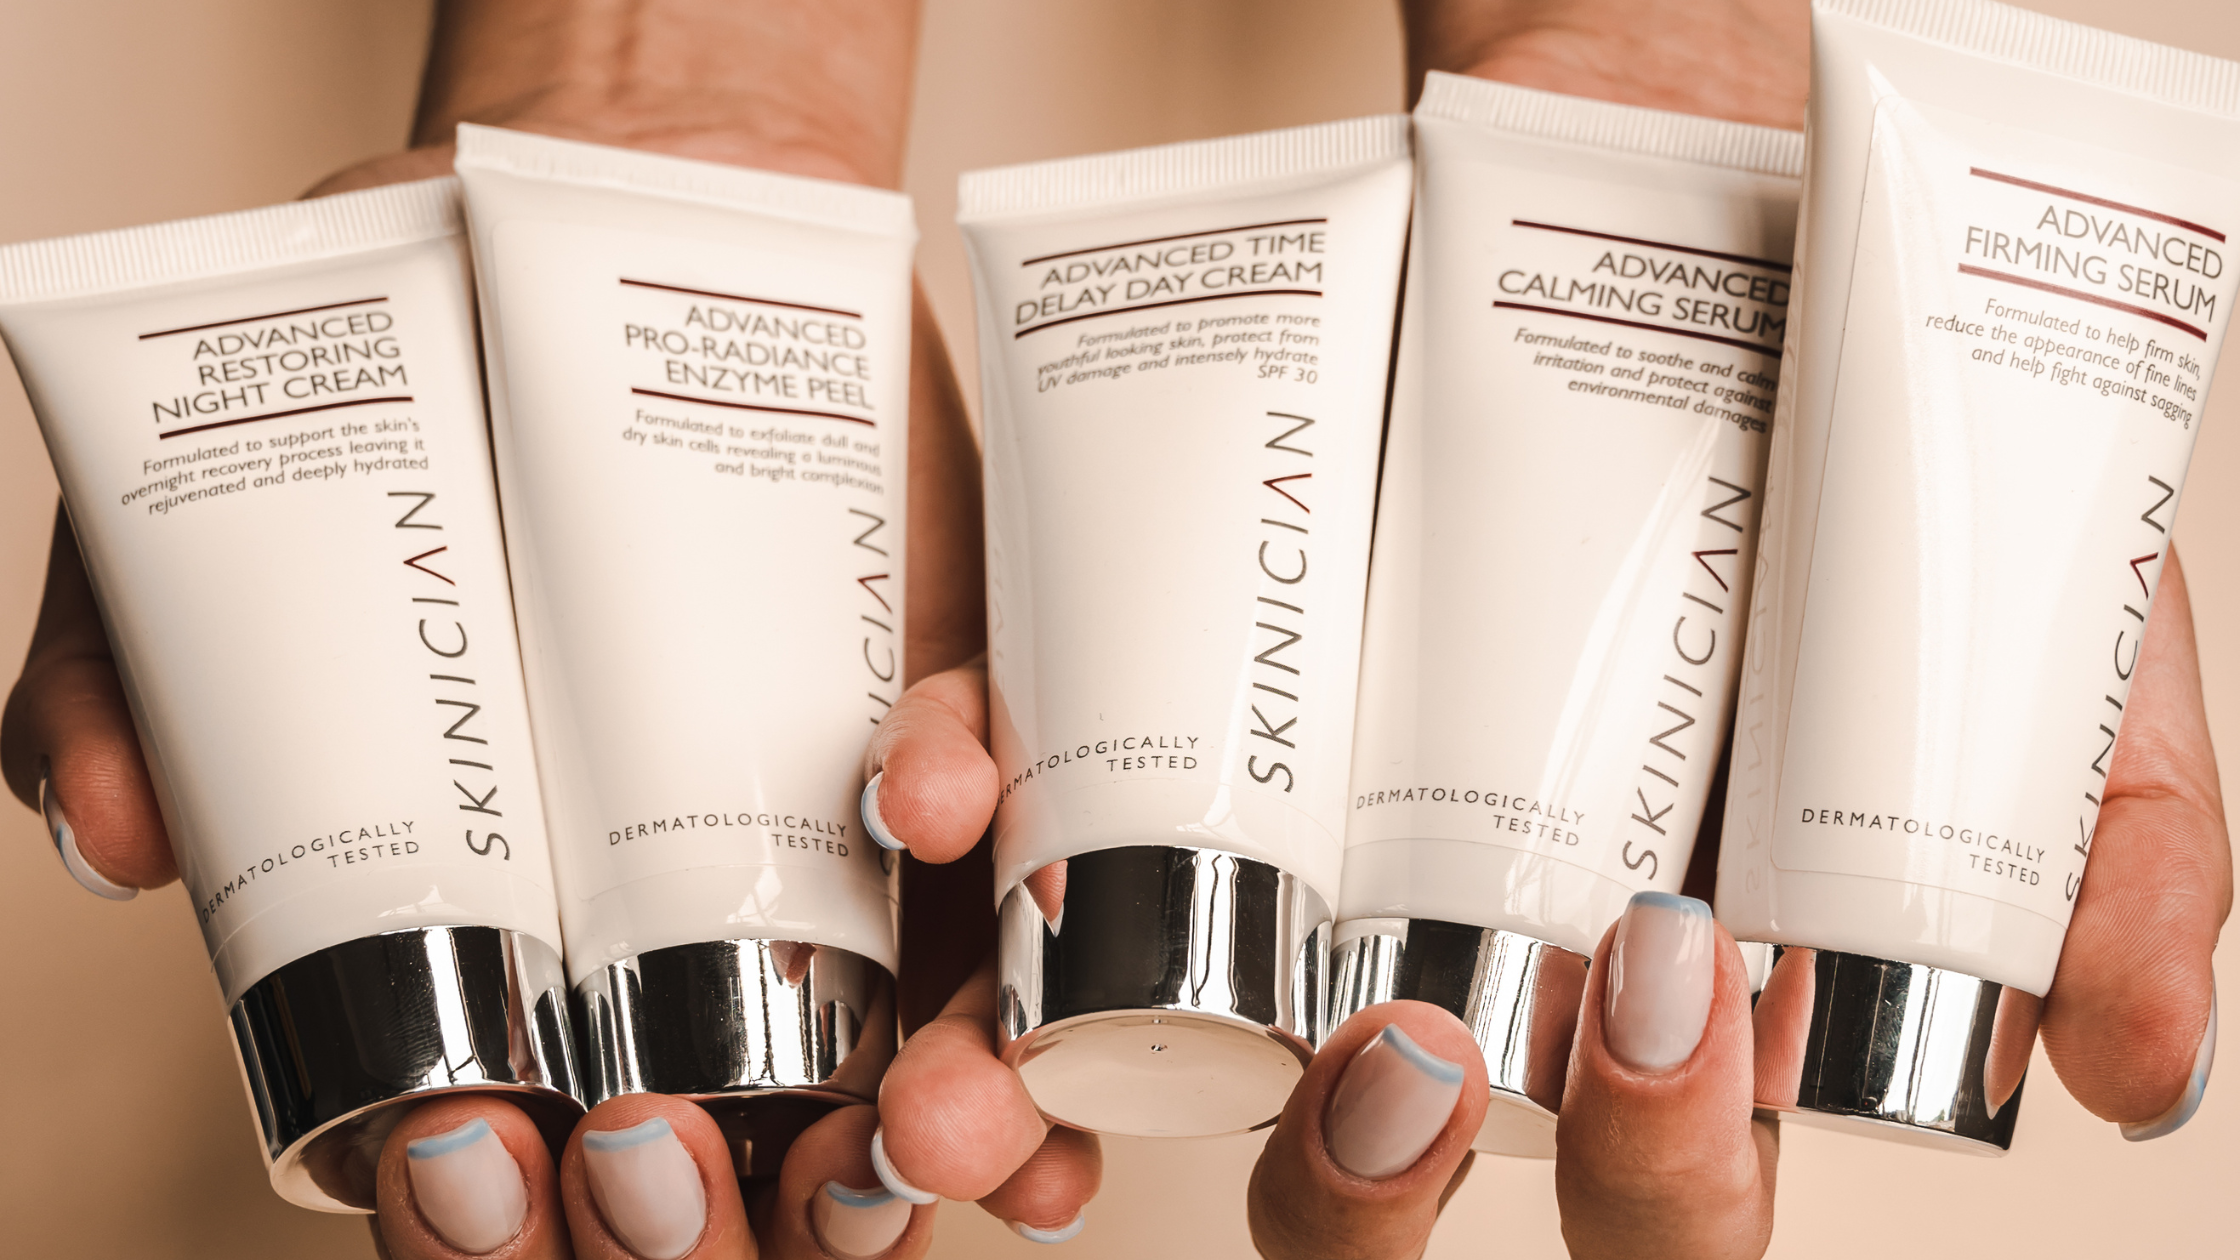 A tune of SKINICIAN's advanced skin care products held in hand.